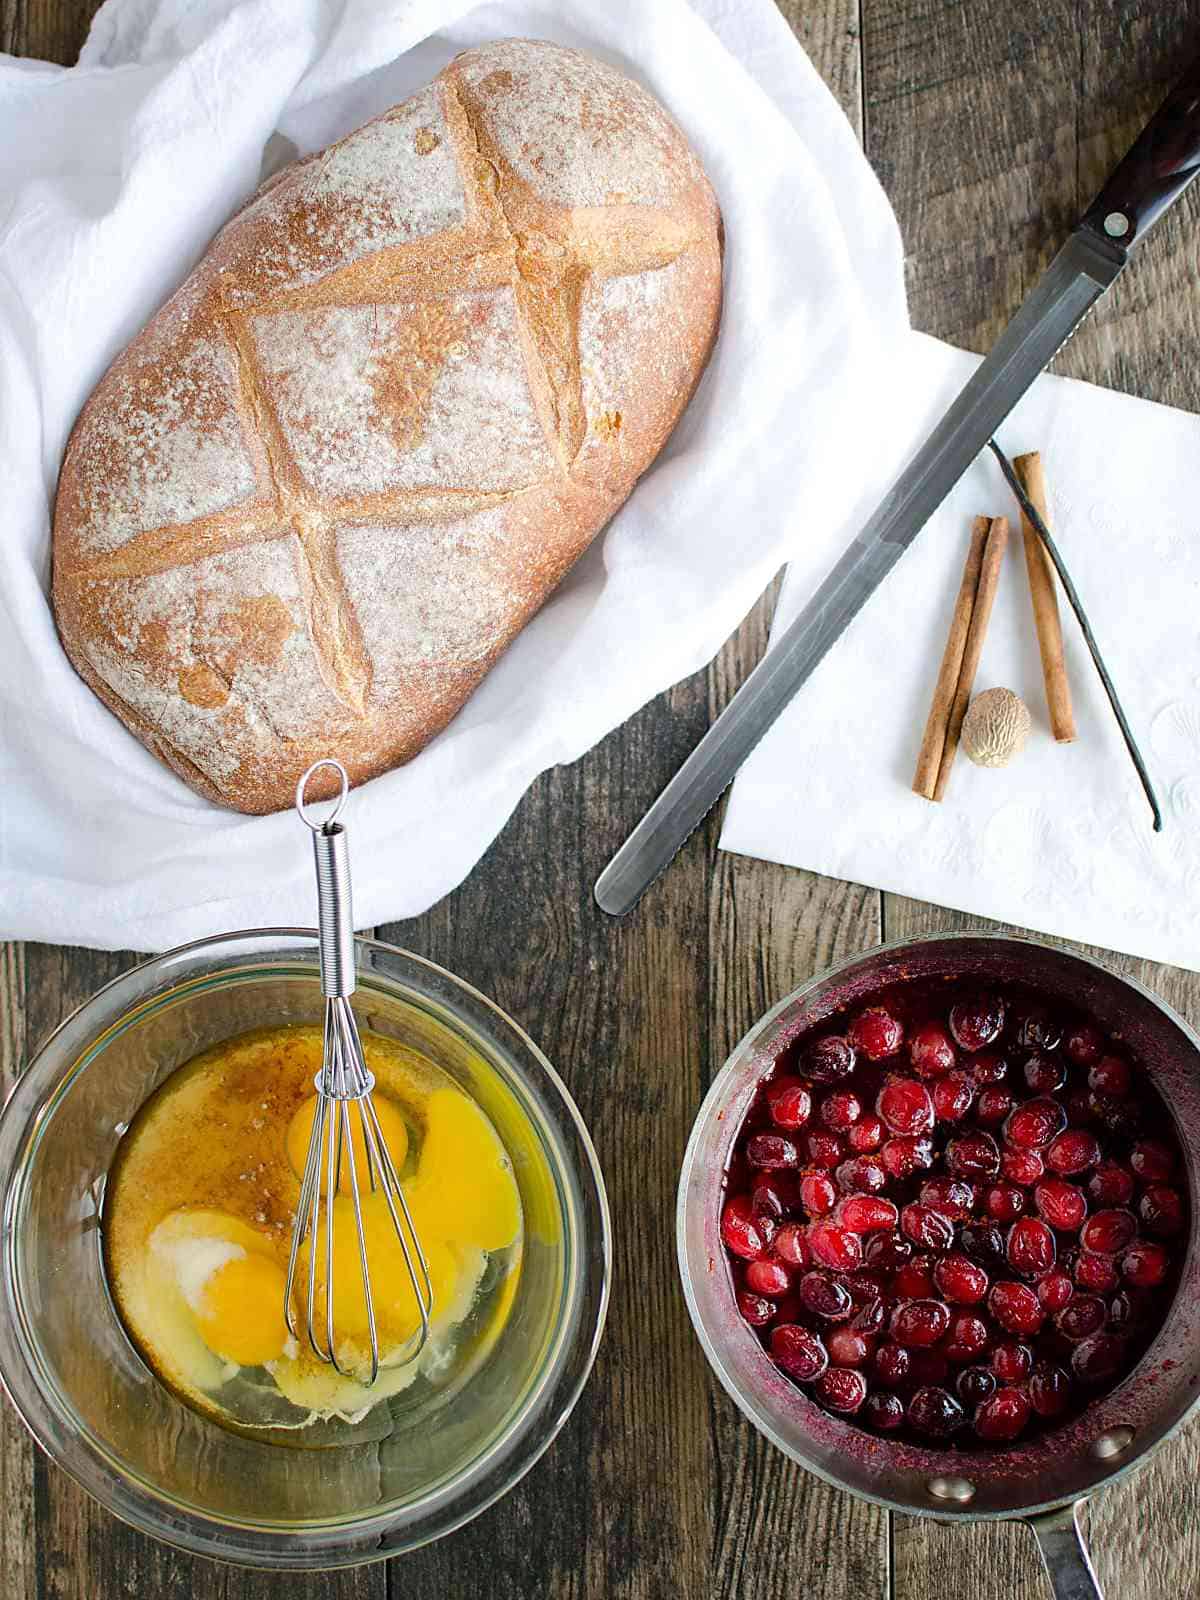 artisan bread, bowl with cracked eggs and egg nog, pan of cranberry syrup.